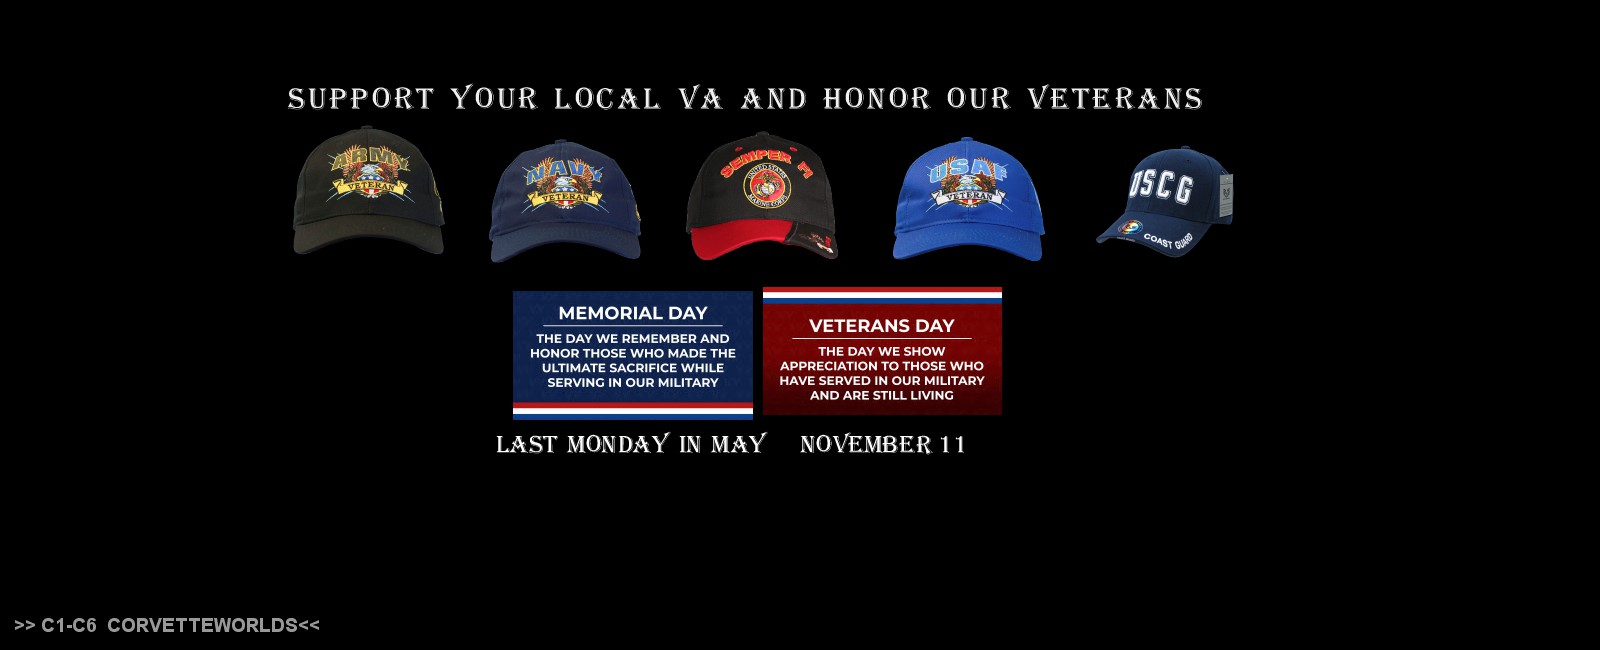 honor_our_veterans_2